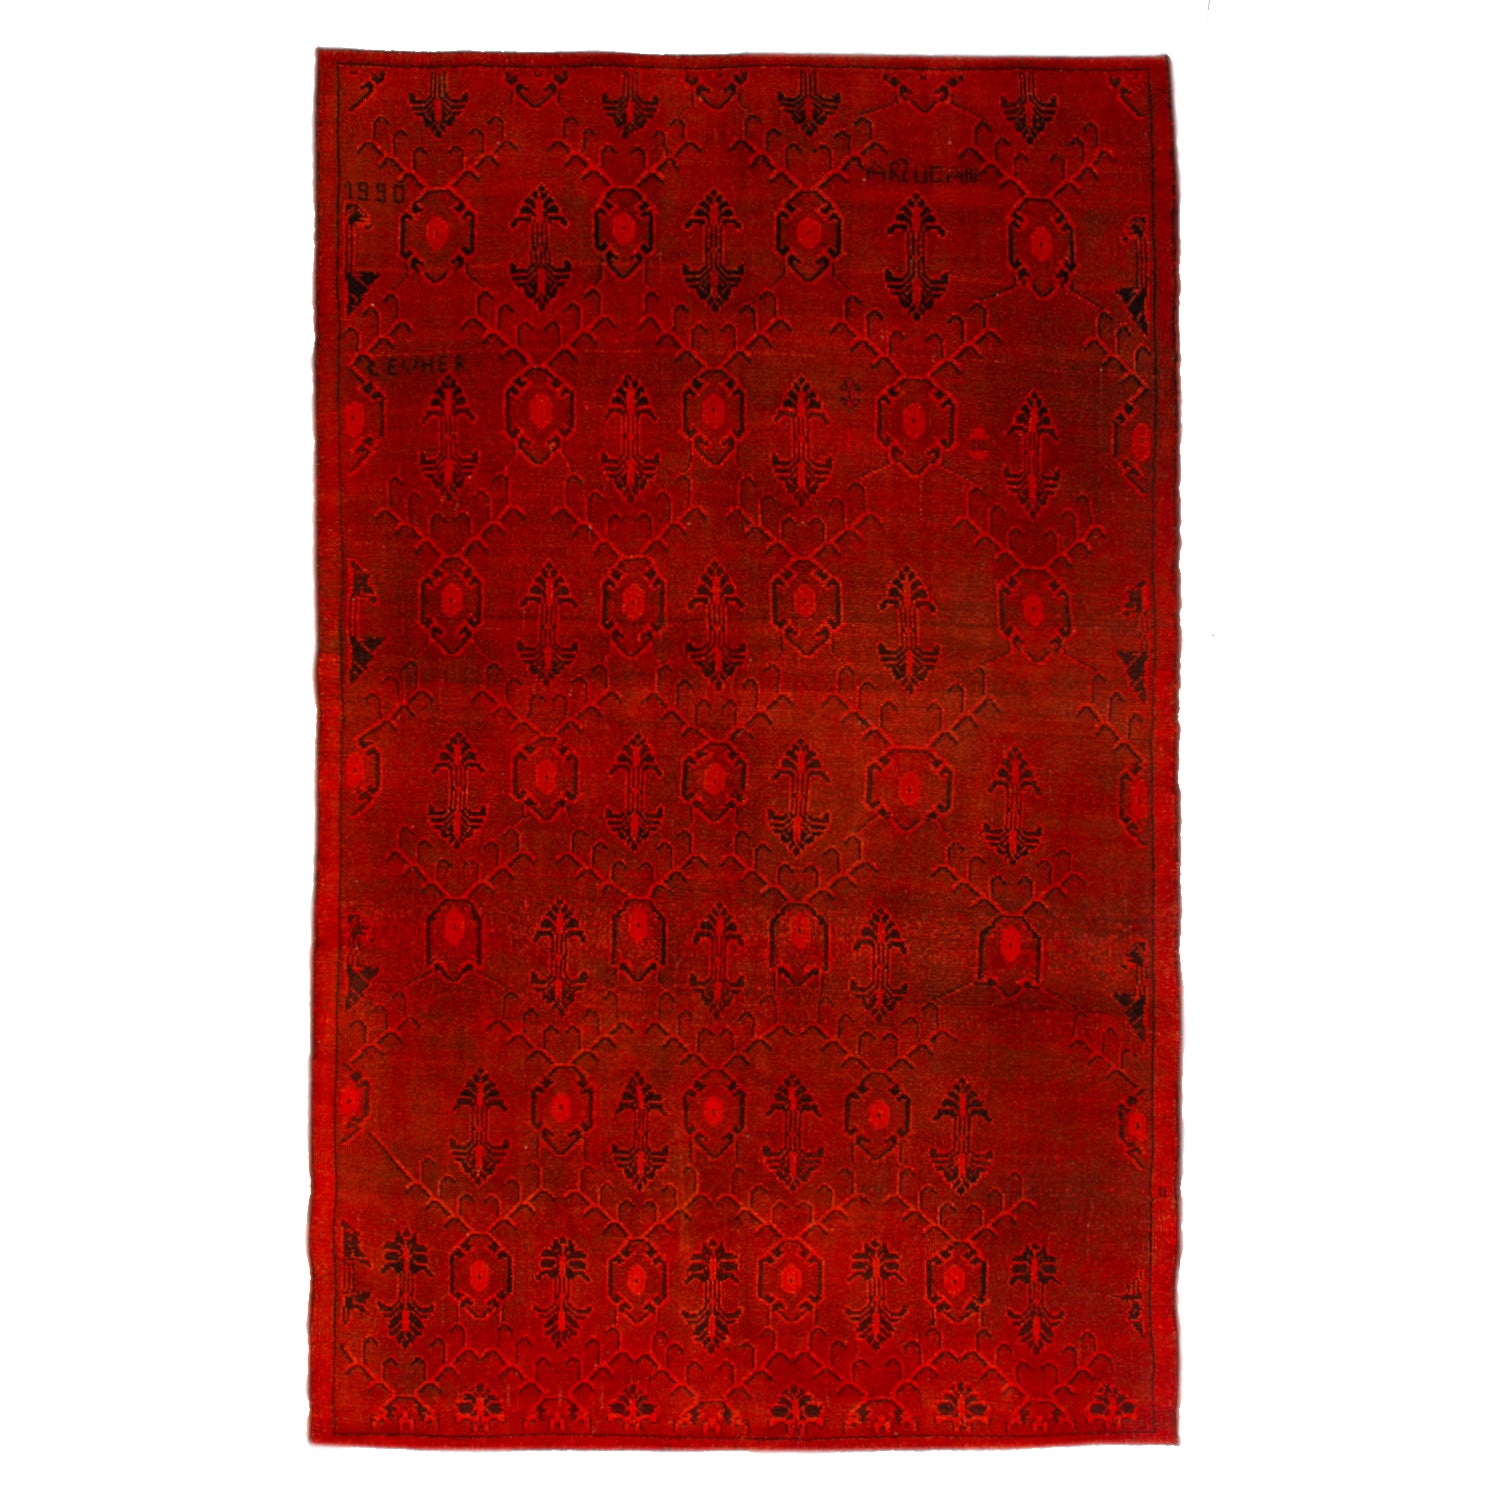 Exquisite handmade carpet showcases intricate traditional patterns in rich red.